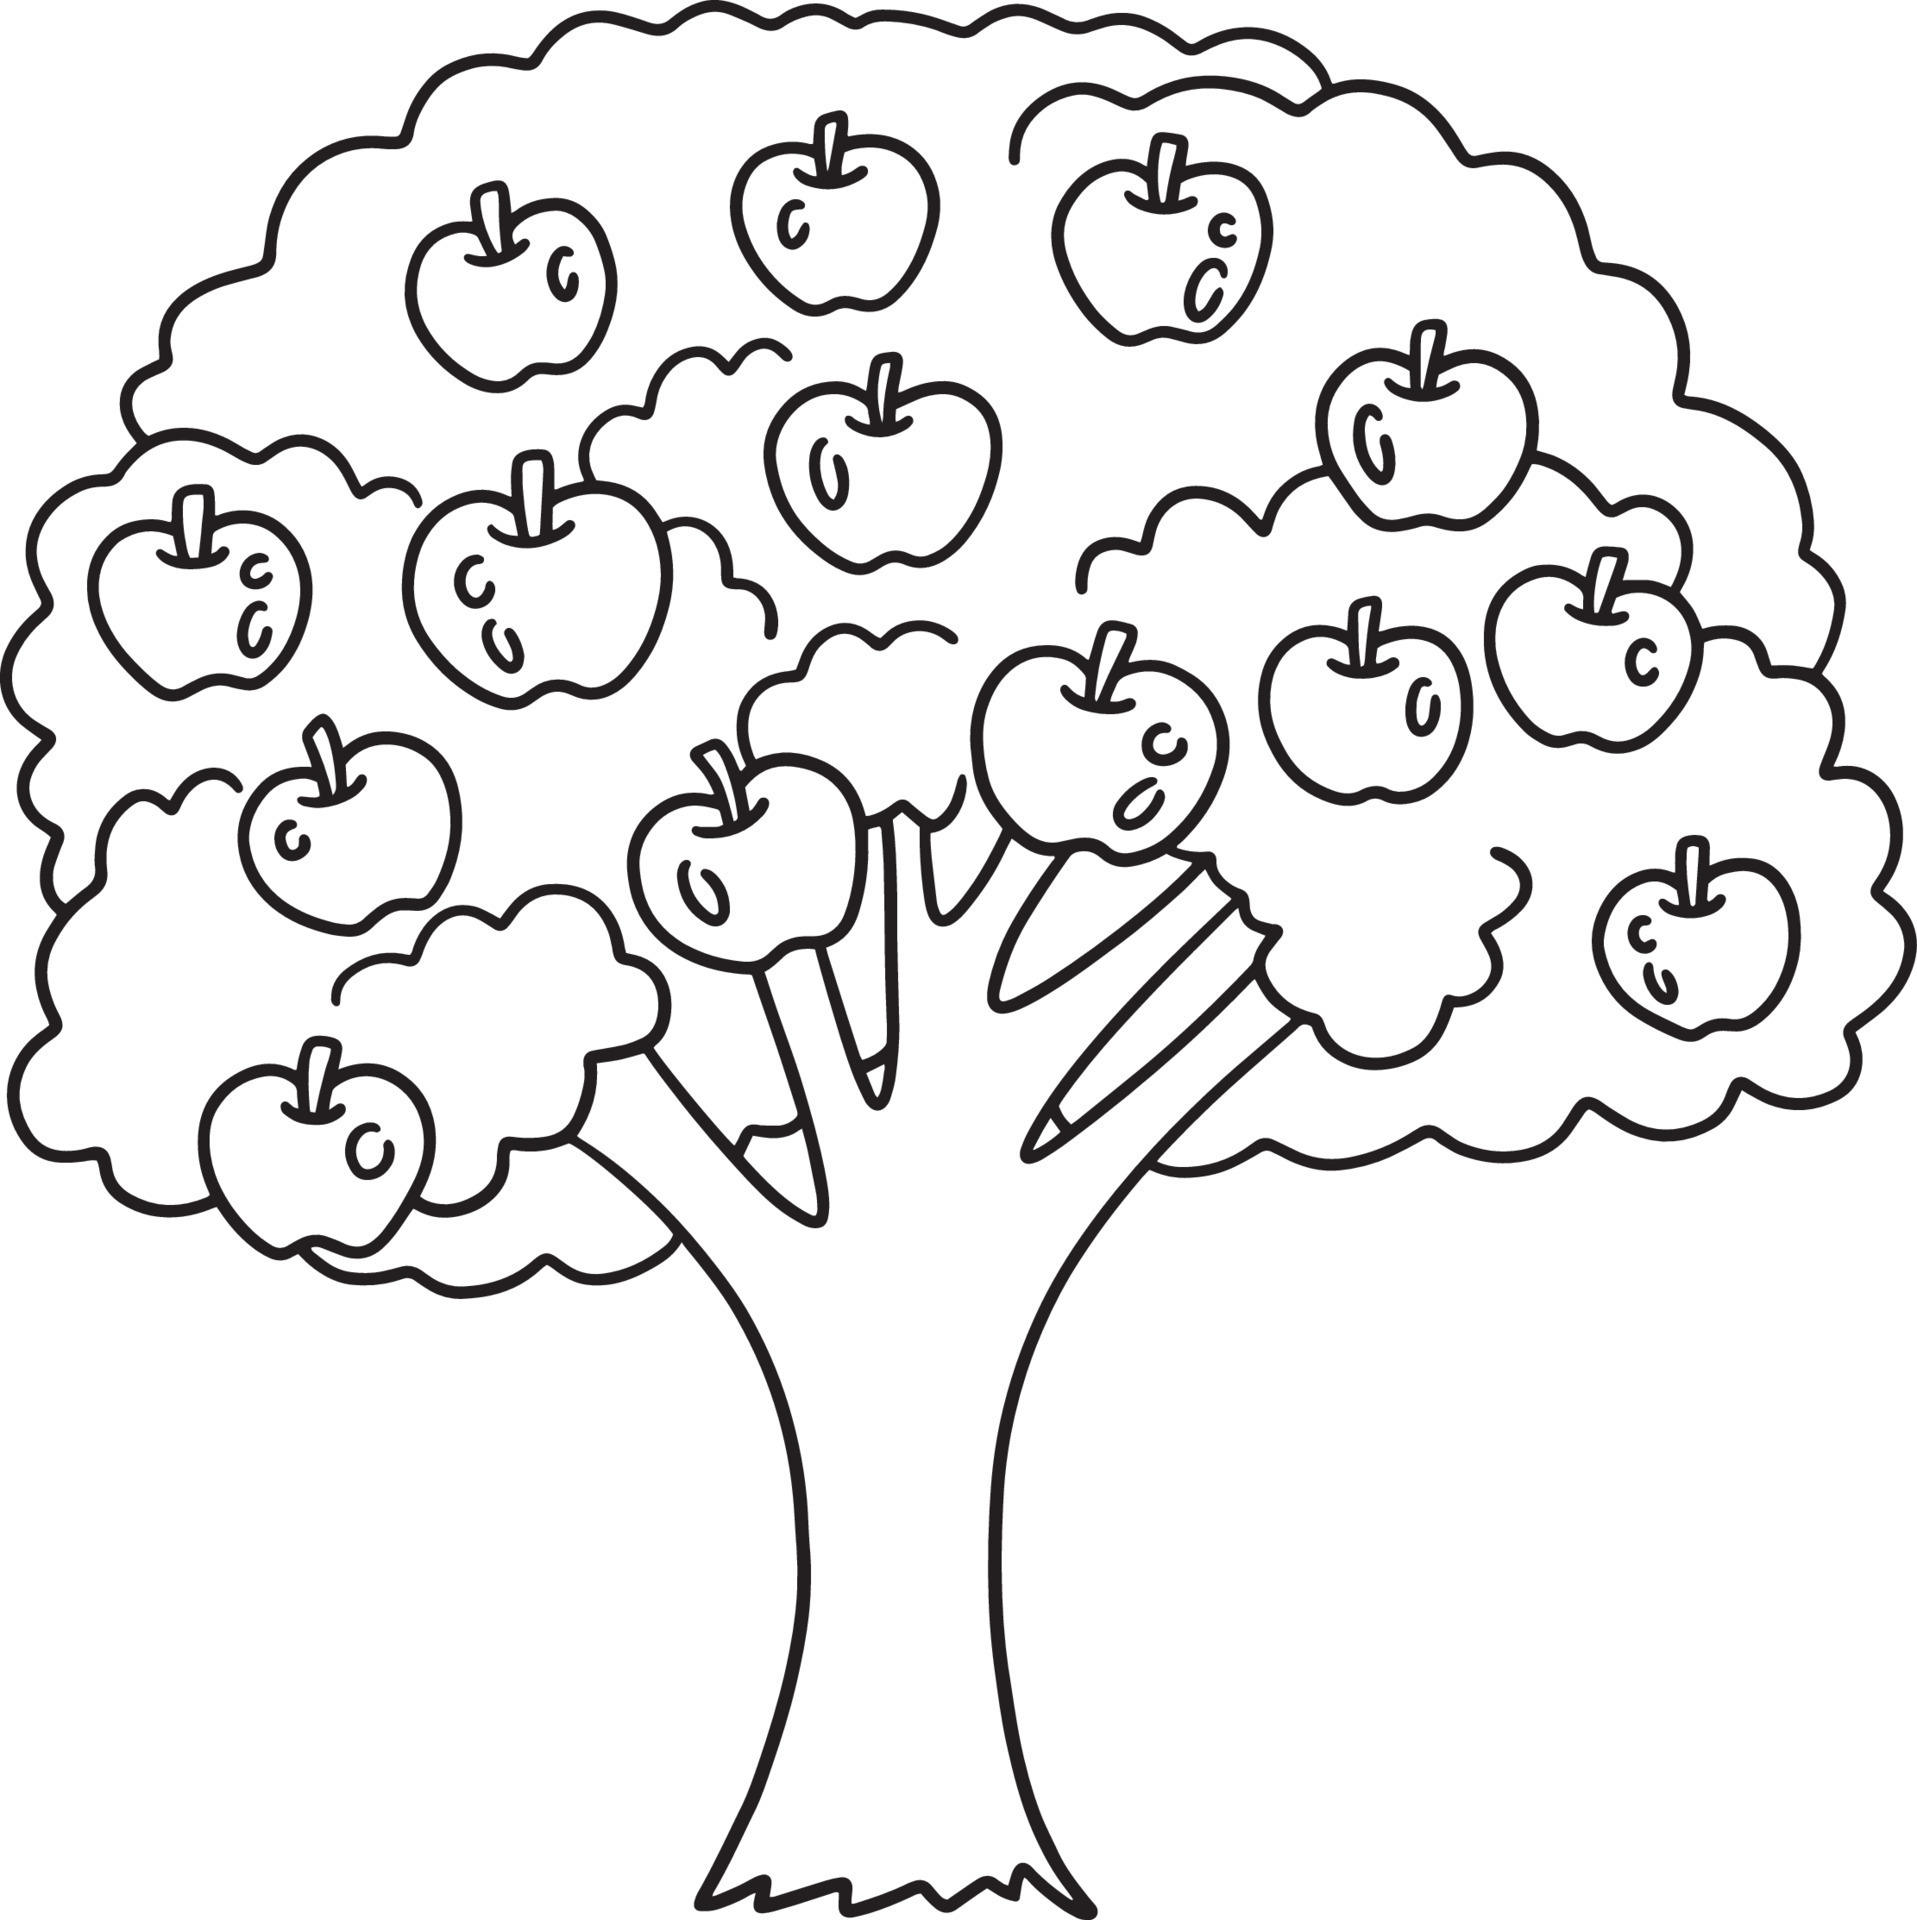 Apple tree with apples for kids #2